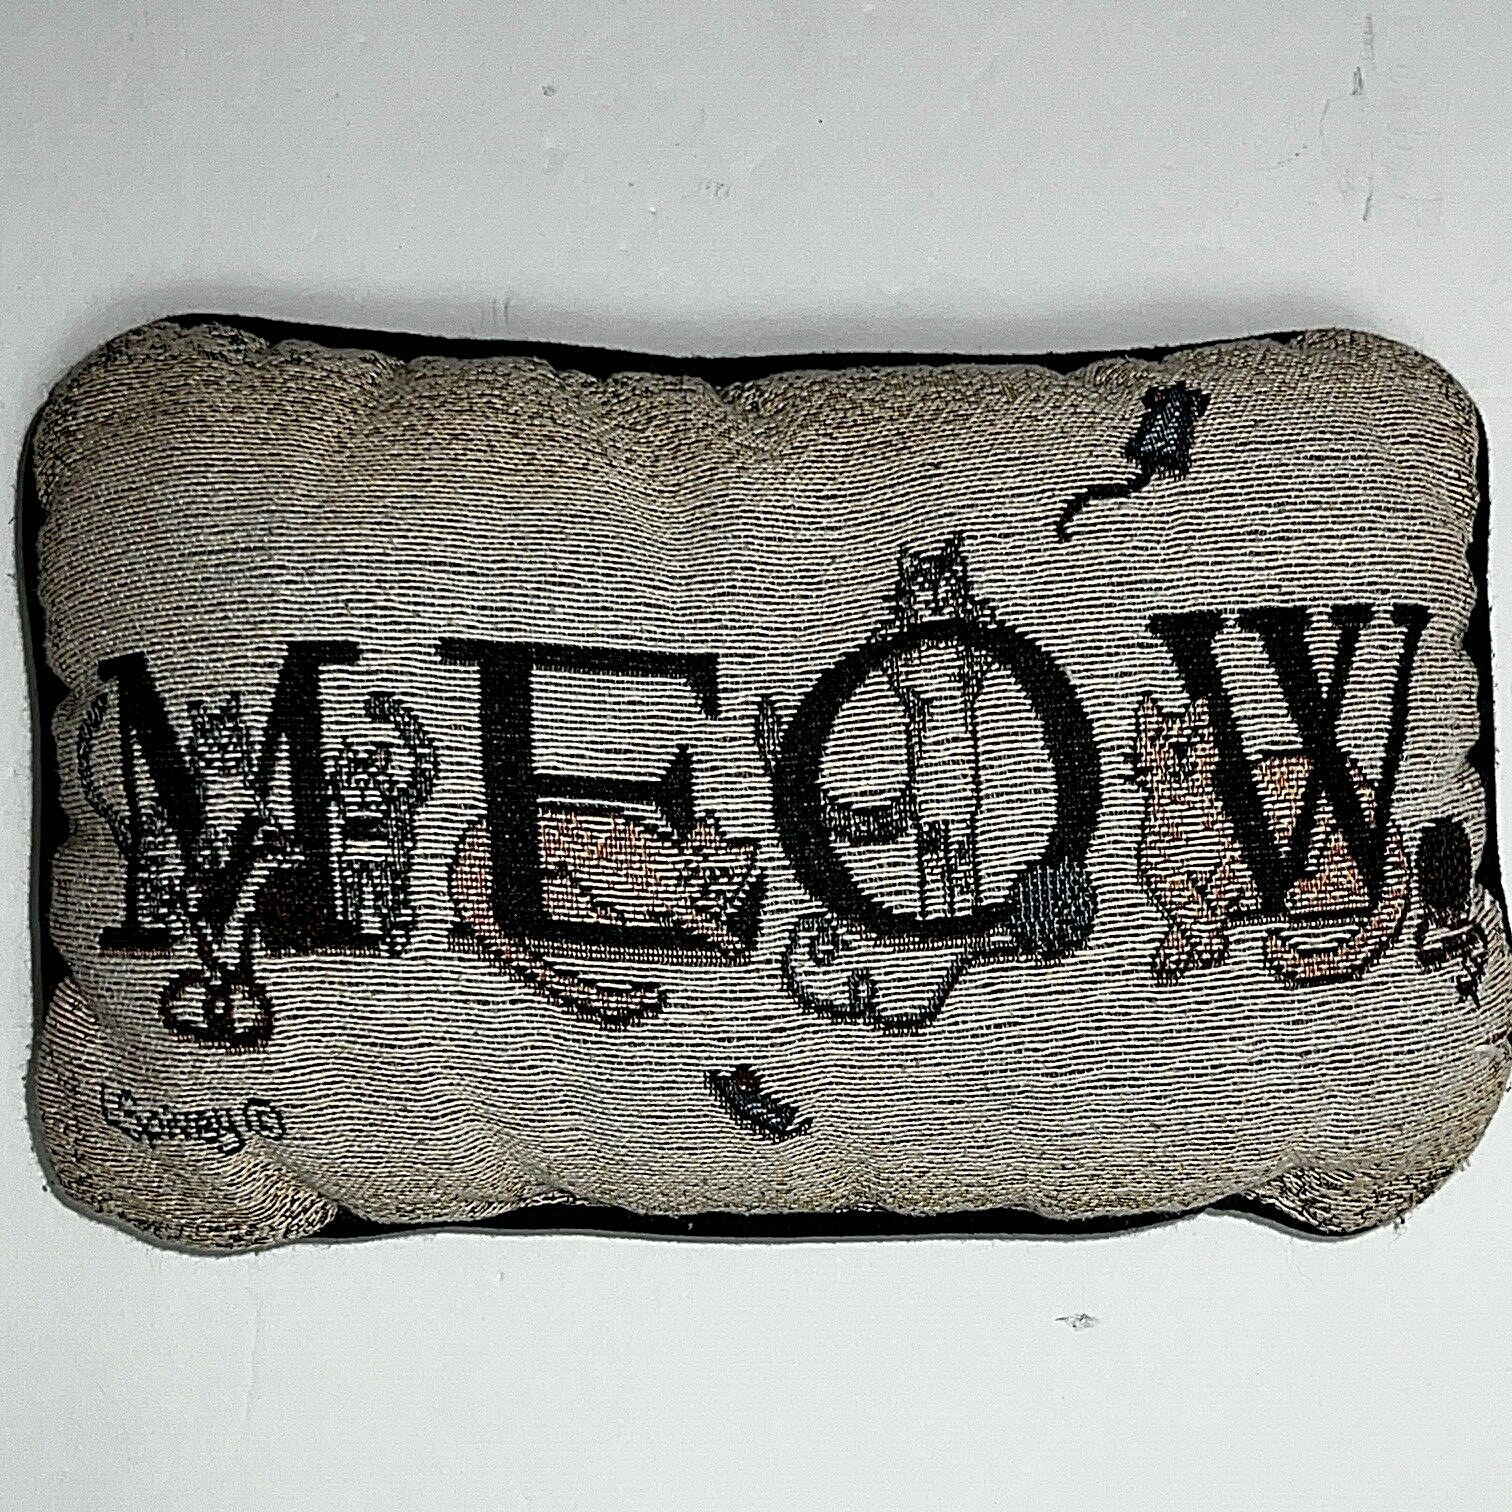 Tapestry Cat Meow Pillow, Small 11.5" X 7" L. Spivey Mice Tan Black Multicolor